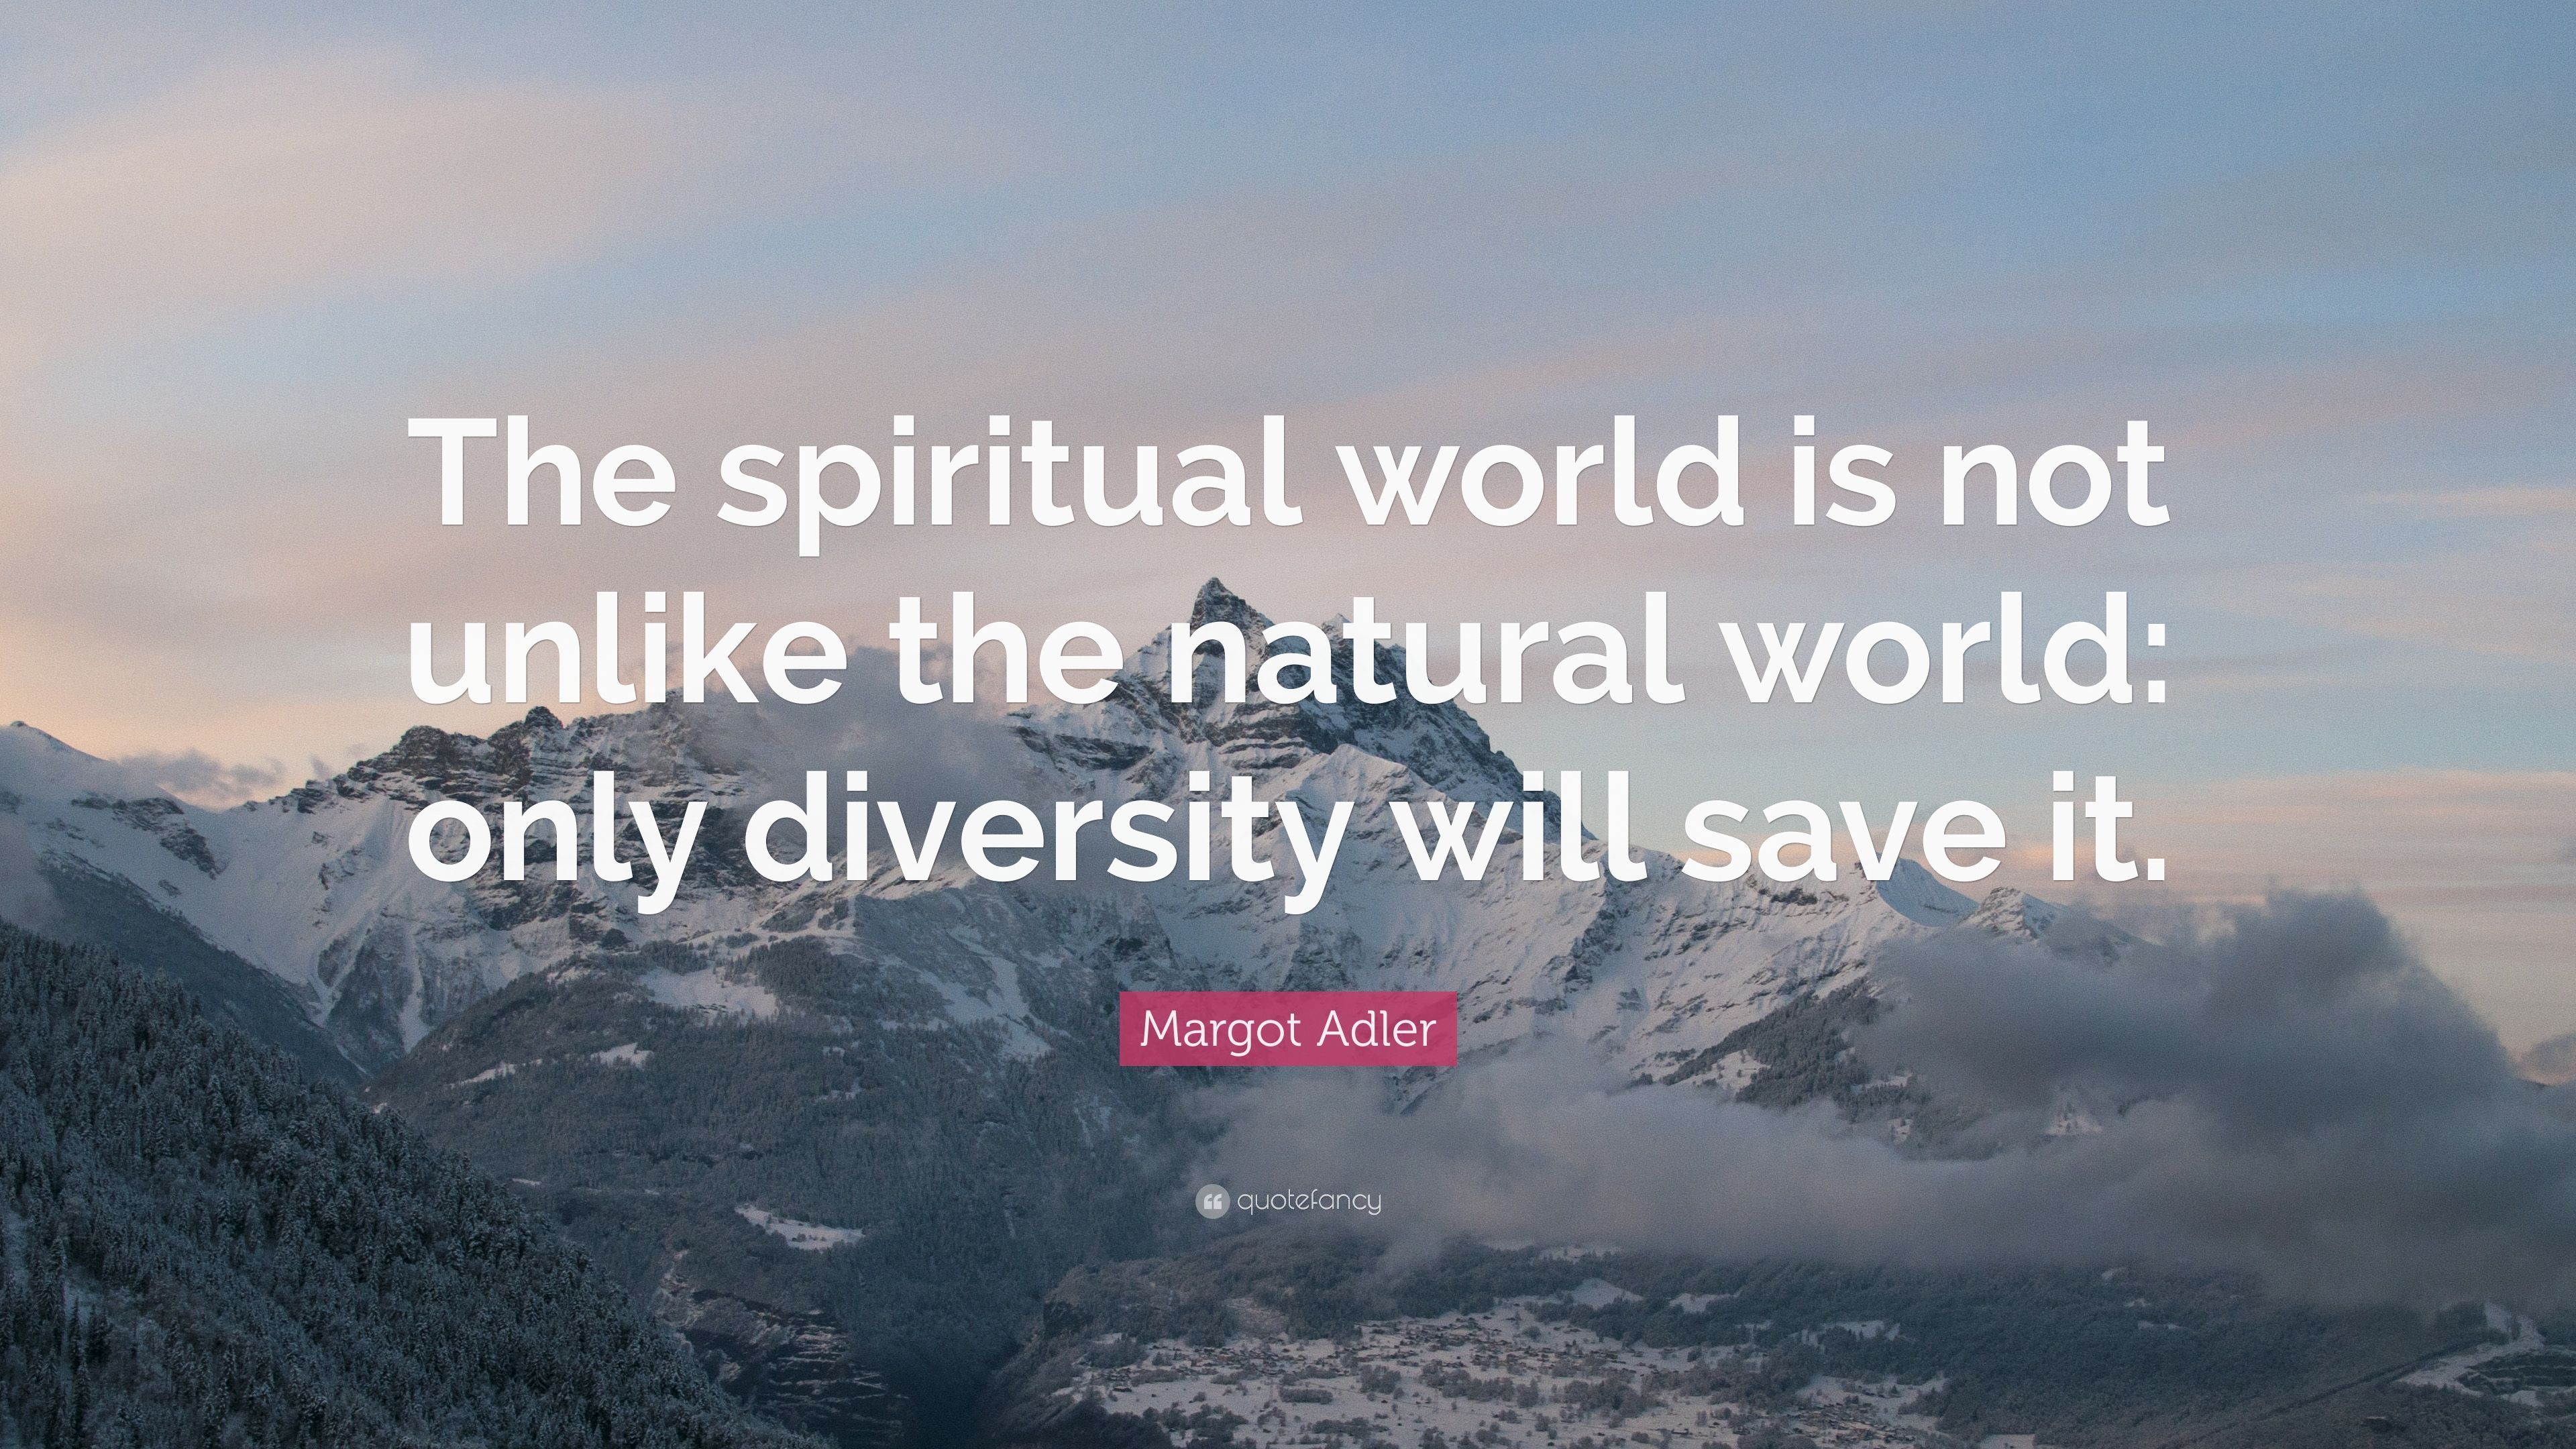 Margot Adler Quote: “The spiritual world is not unlike the natural